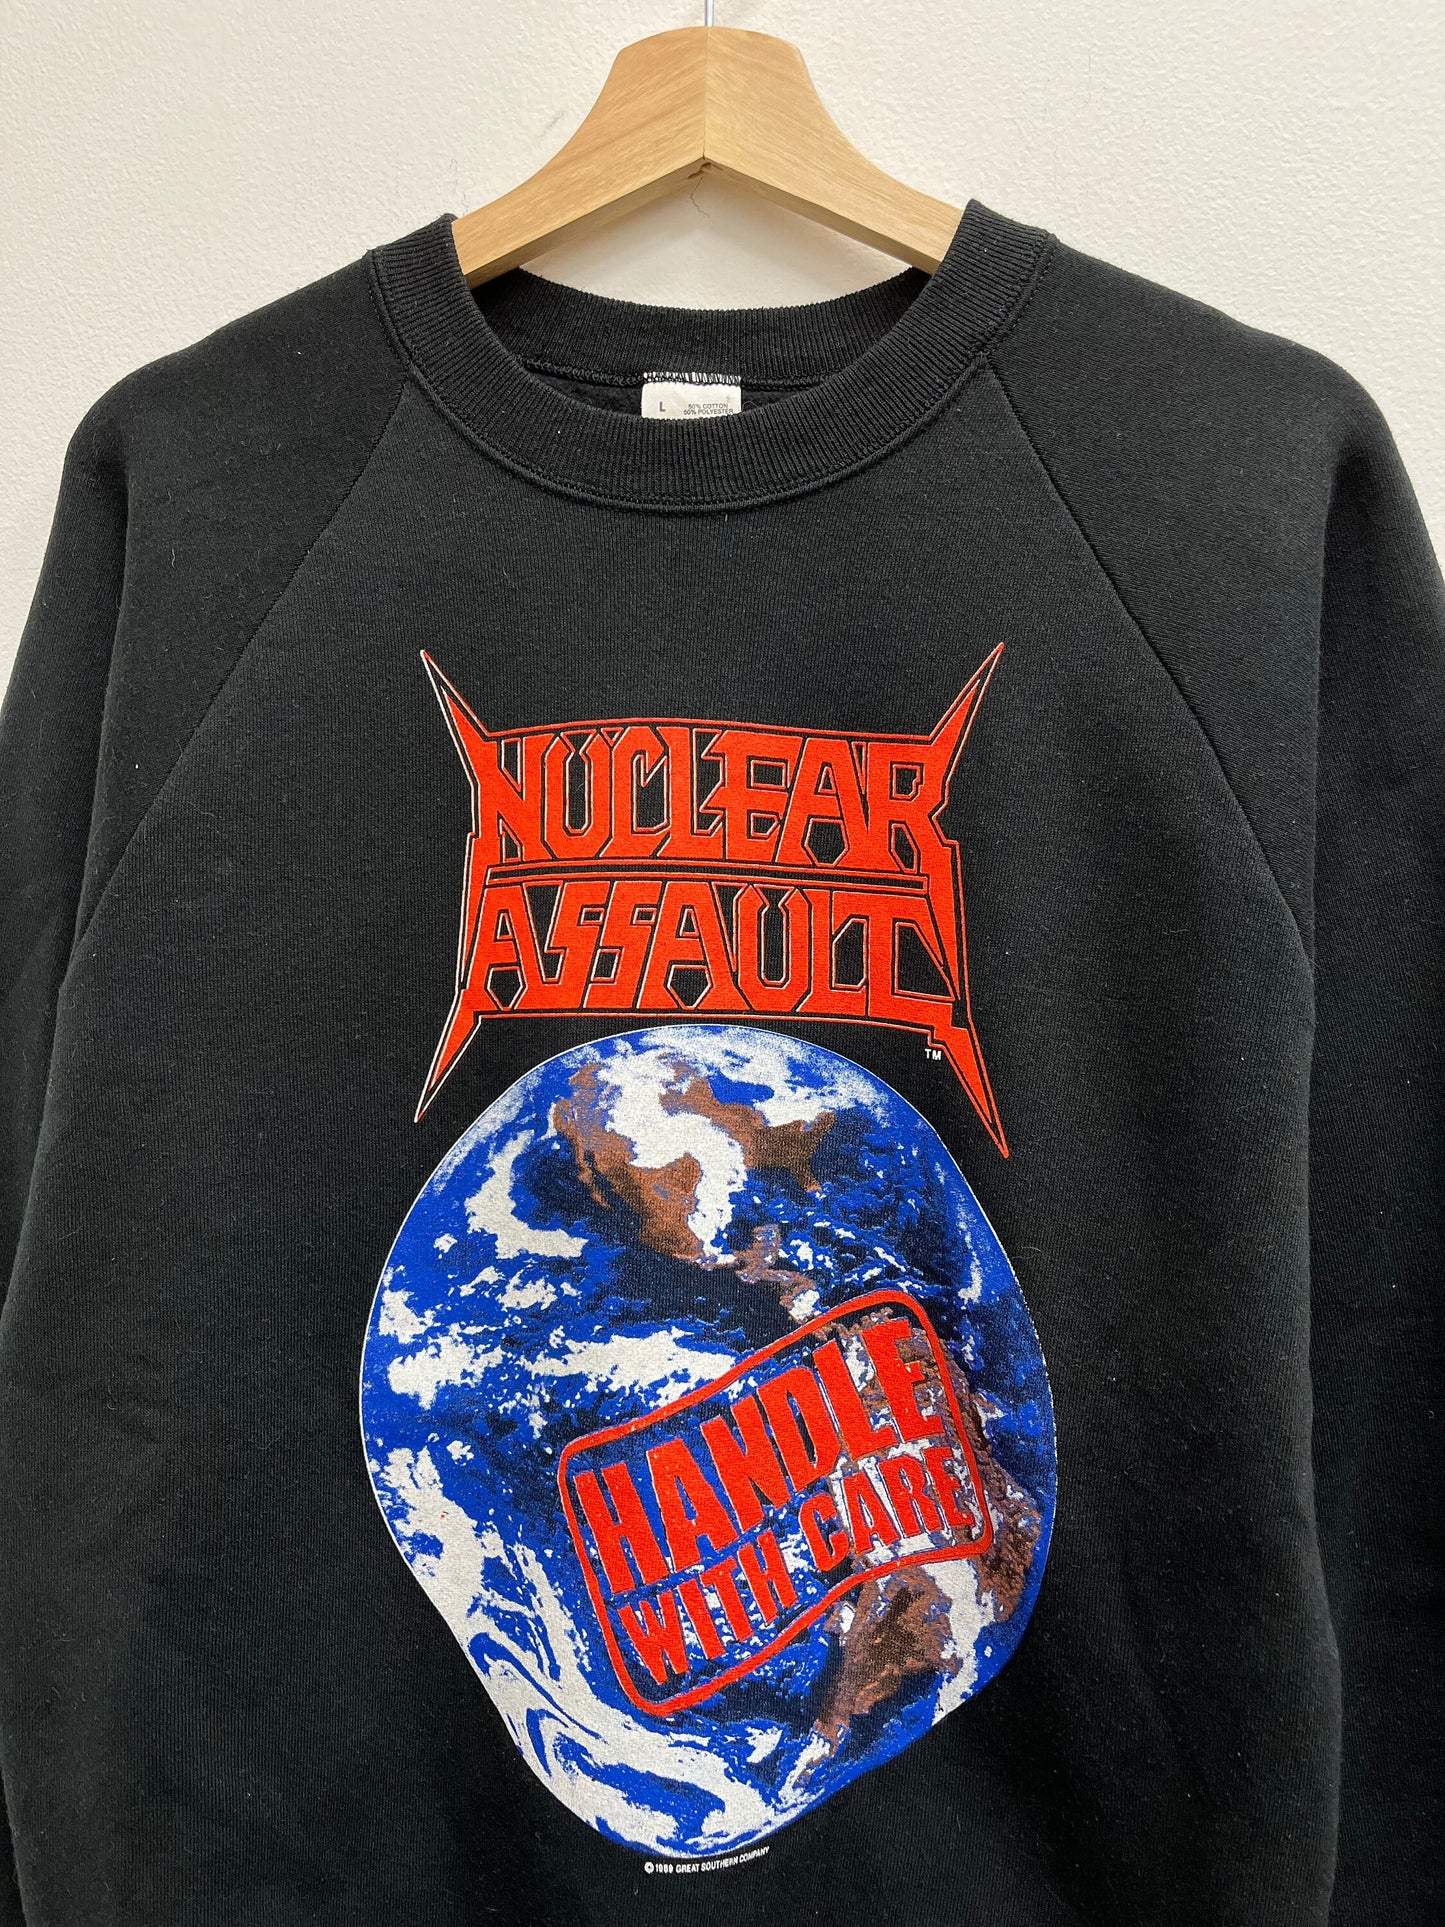 Vintage 1980’s Nuclear Assault Handle With Care Crewneck